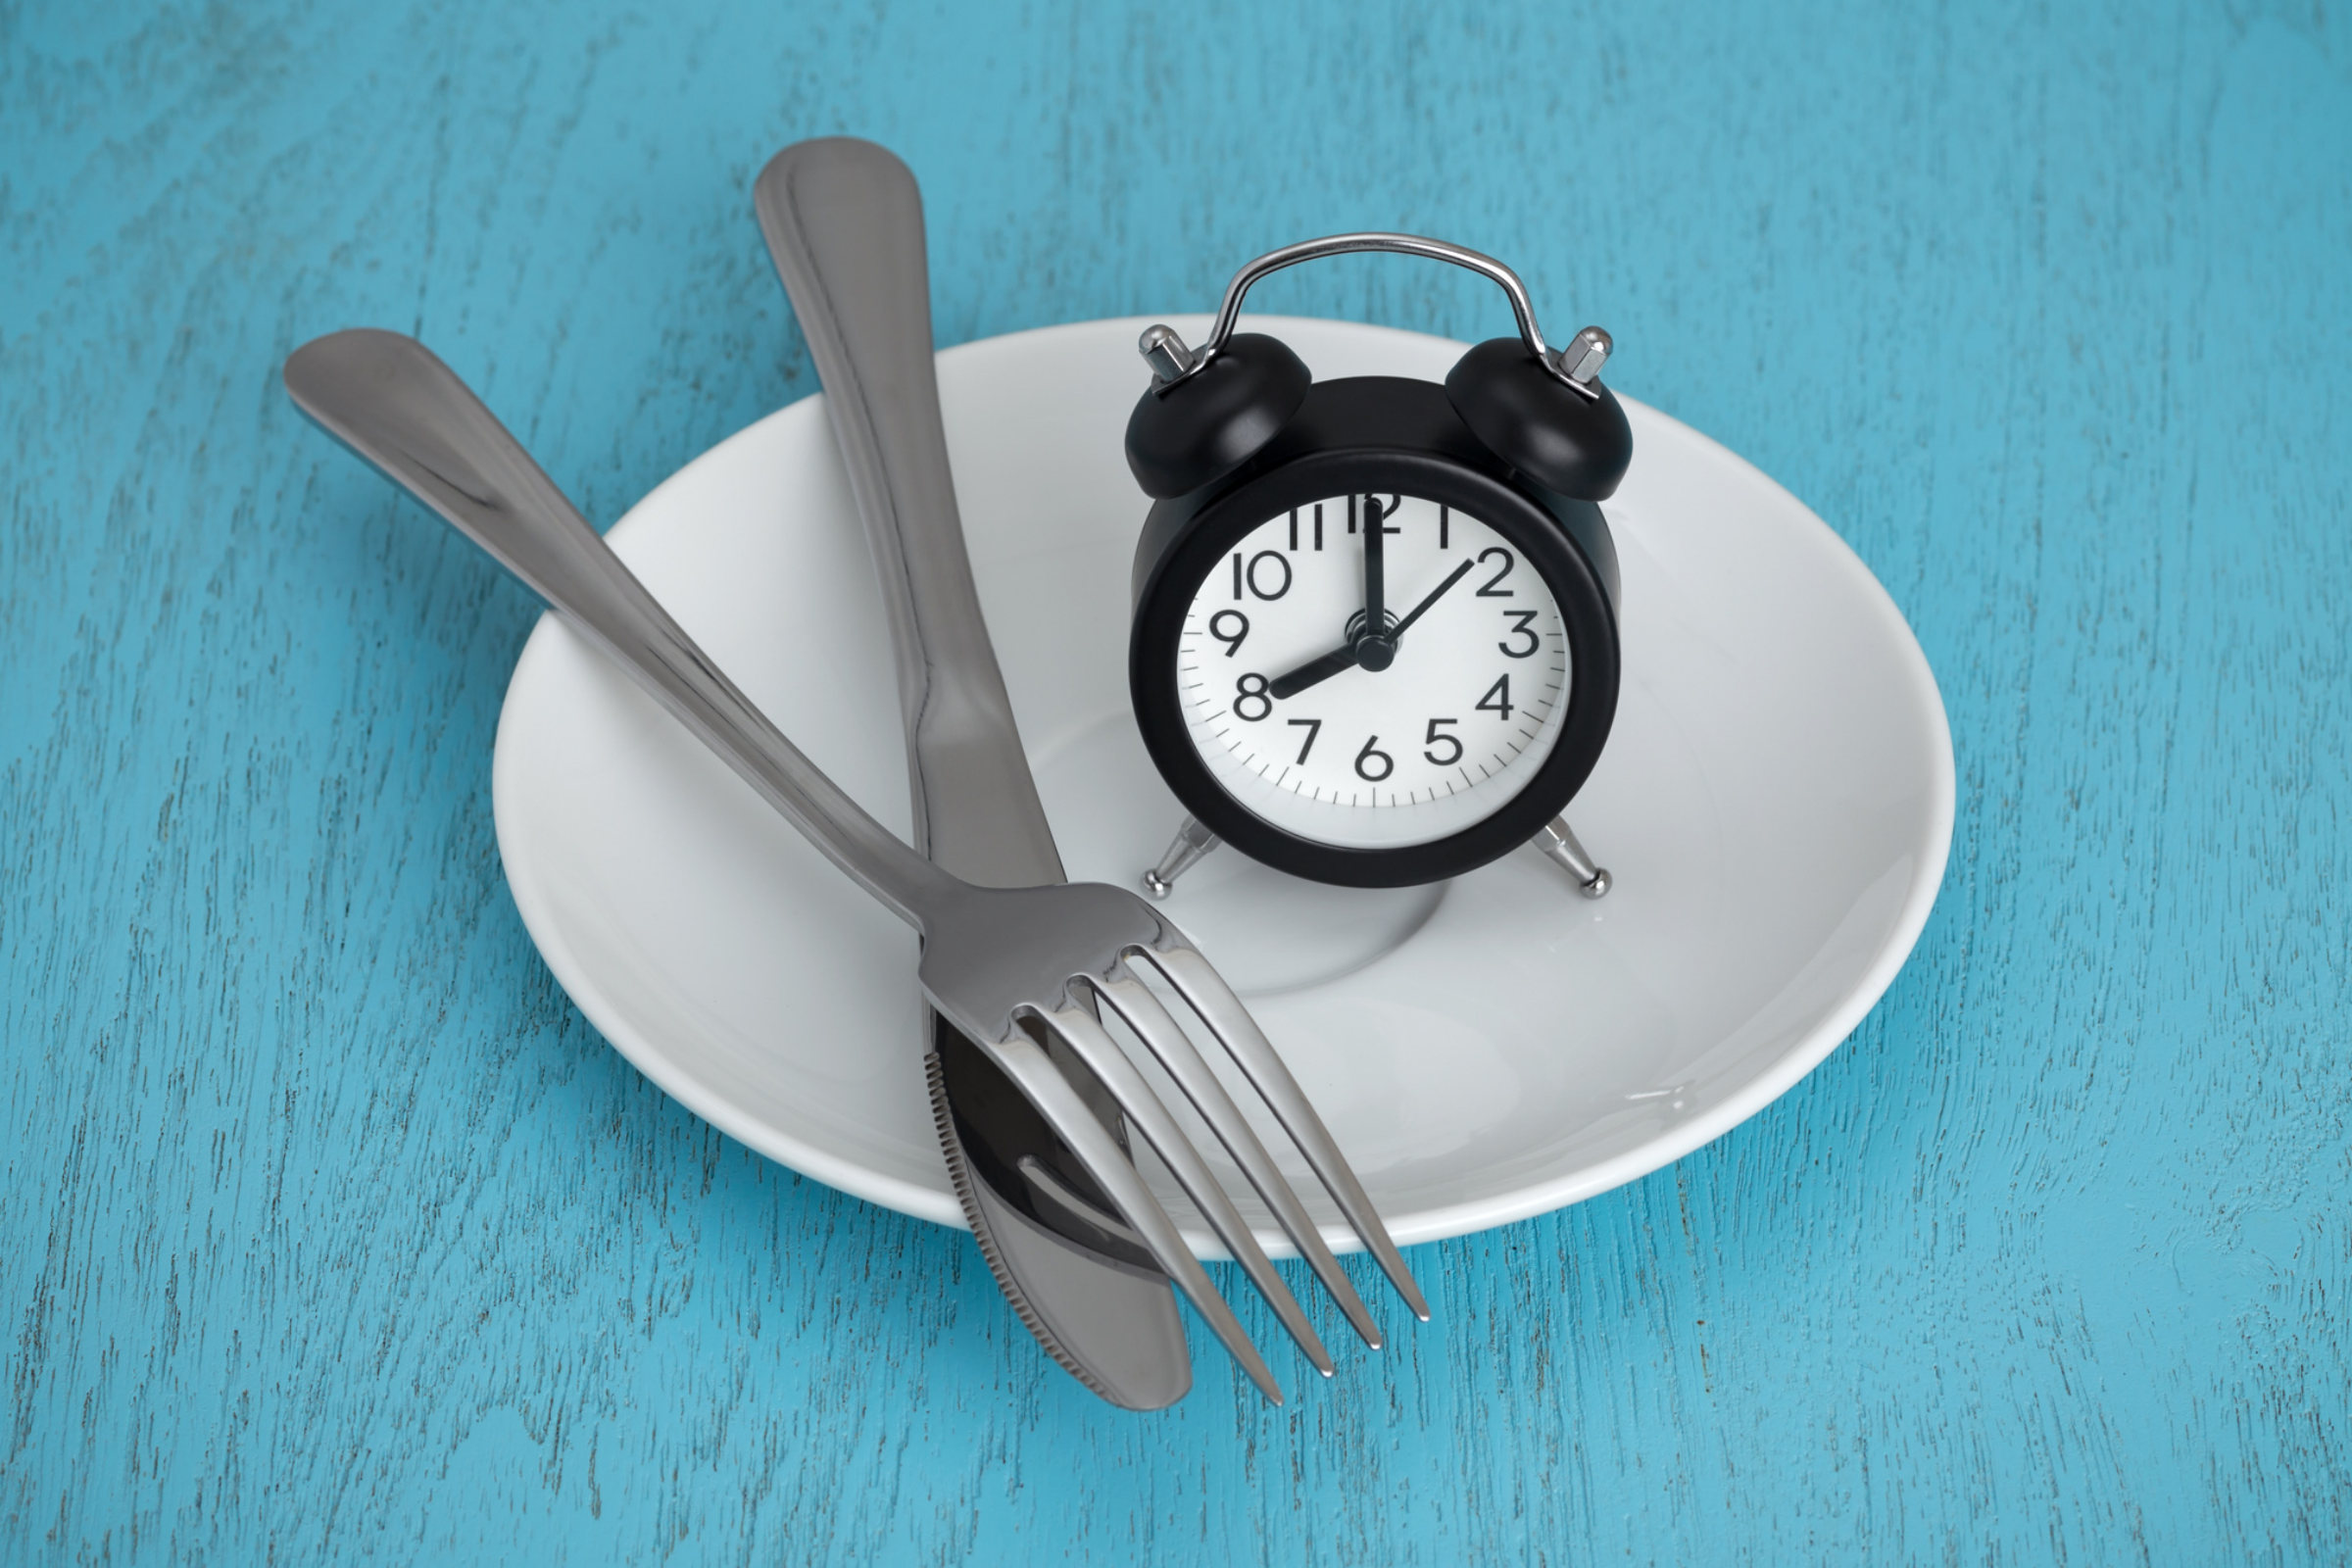 clock on plate with knife and fork - intermittent fasting image